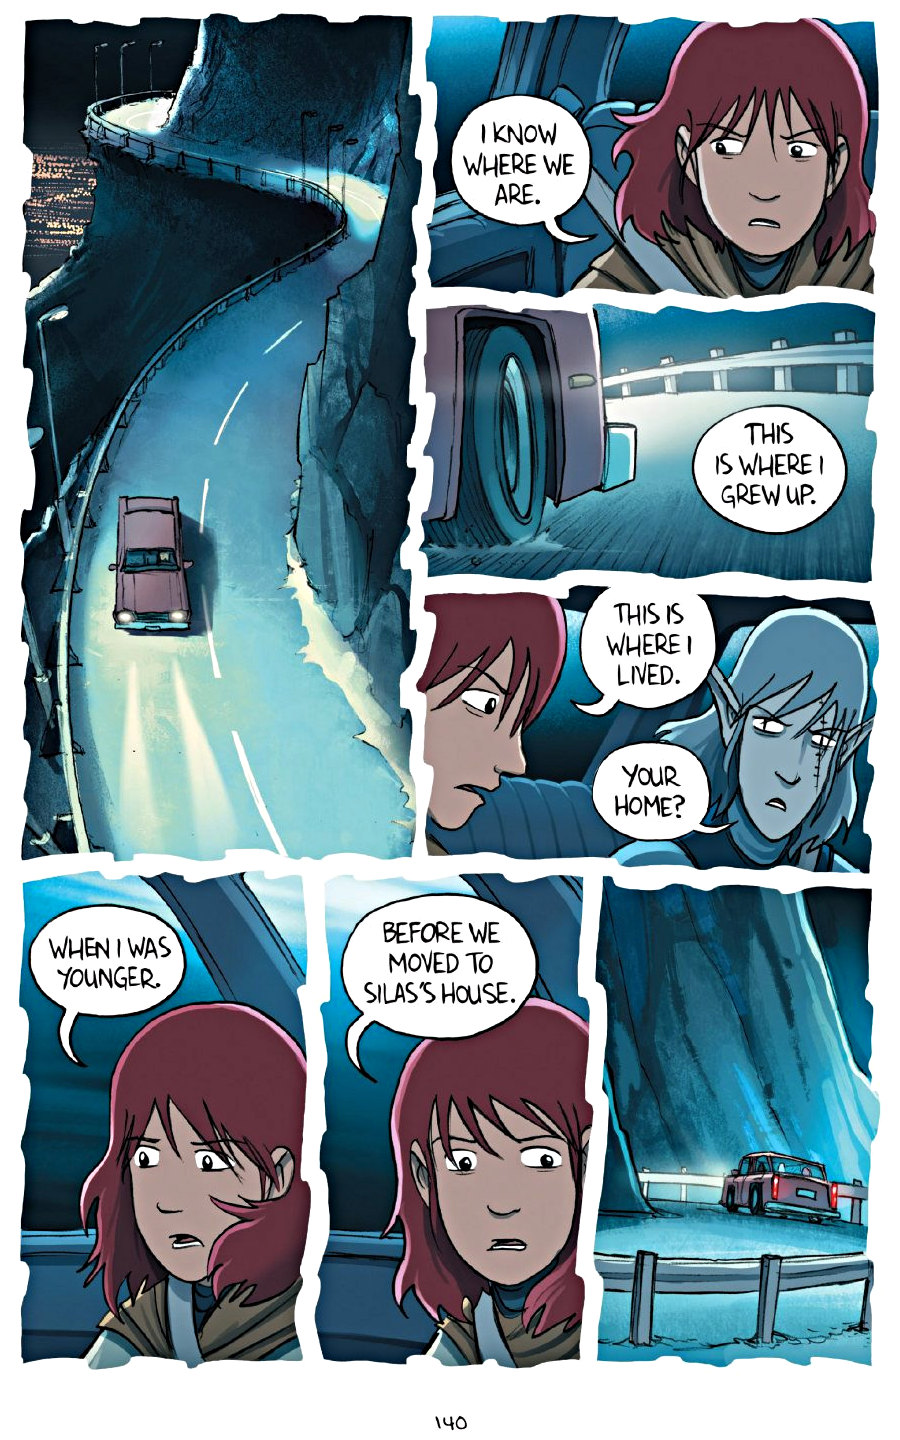 page 140 of amulet 7 firelight graphic novel